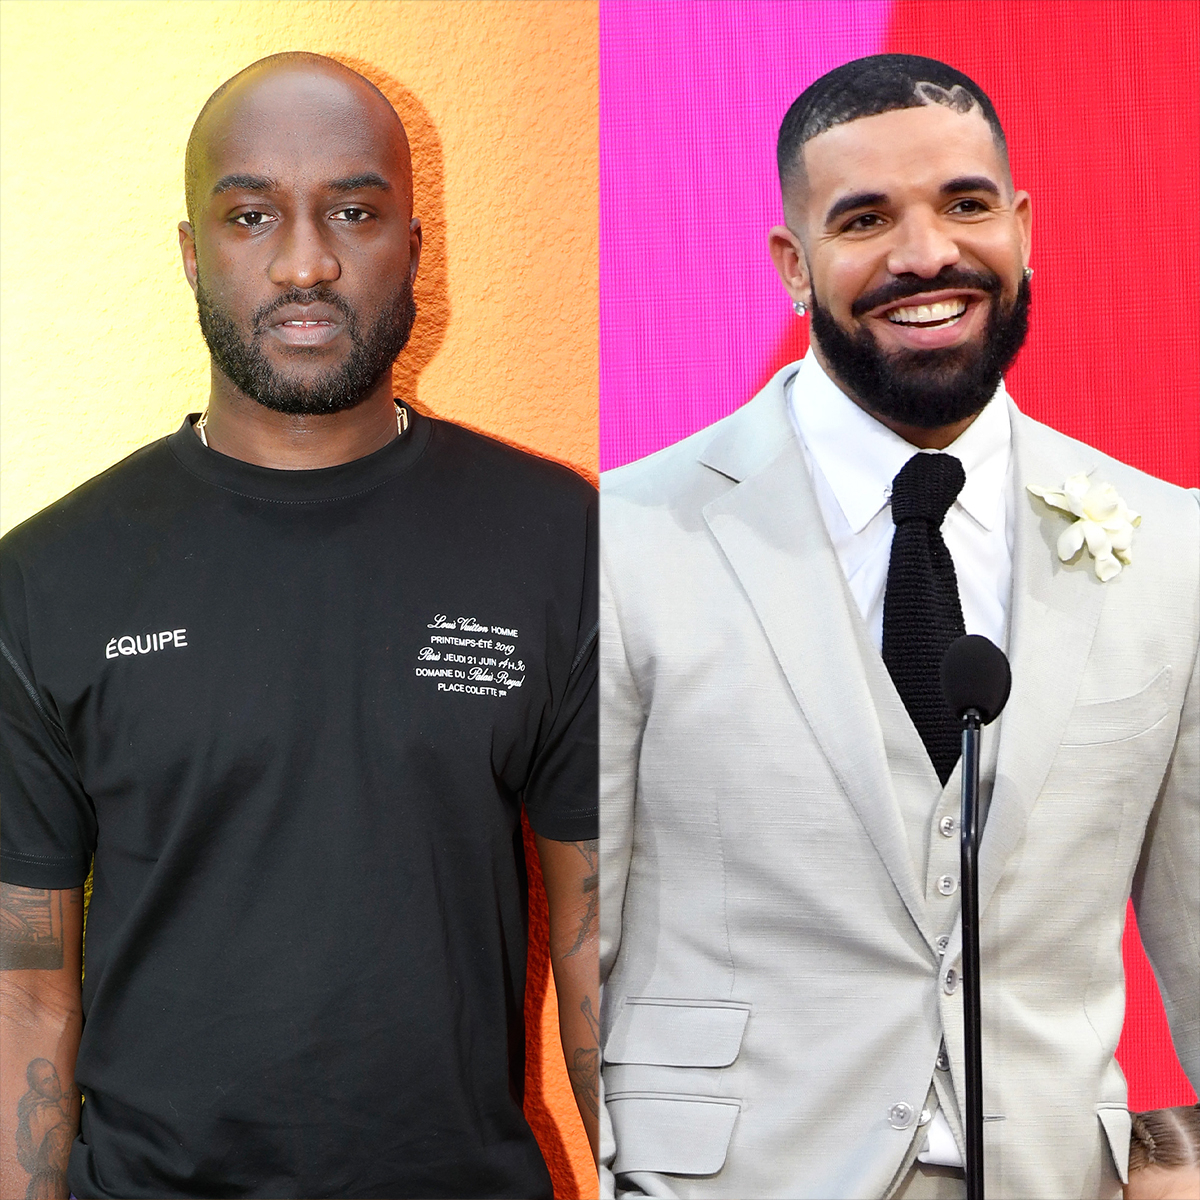 Drake Pays Tribute to Virgil Abloh With Custom Jacket in “8AM in